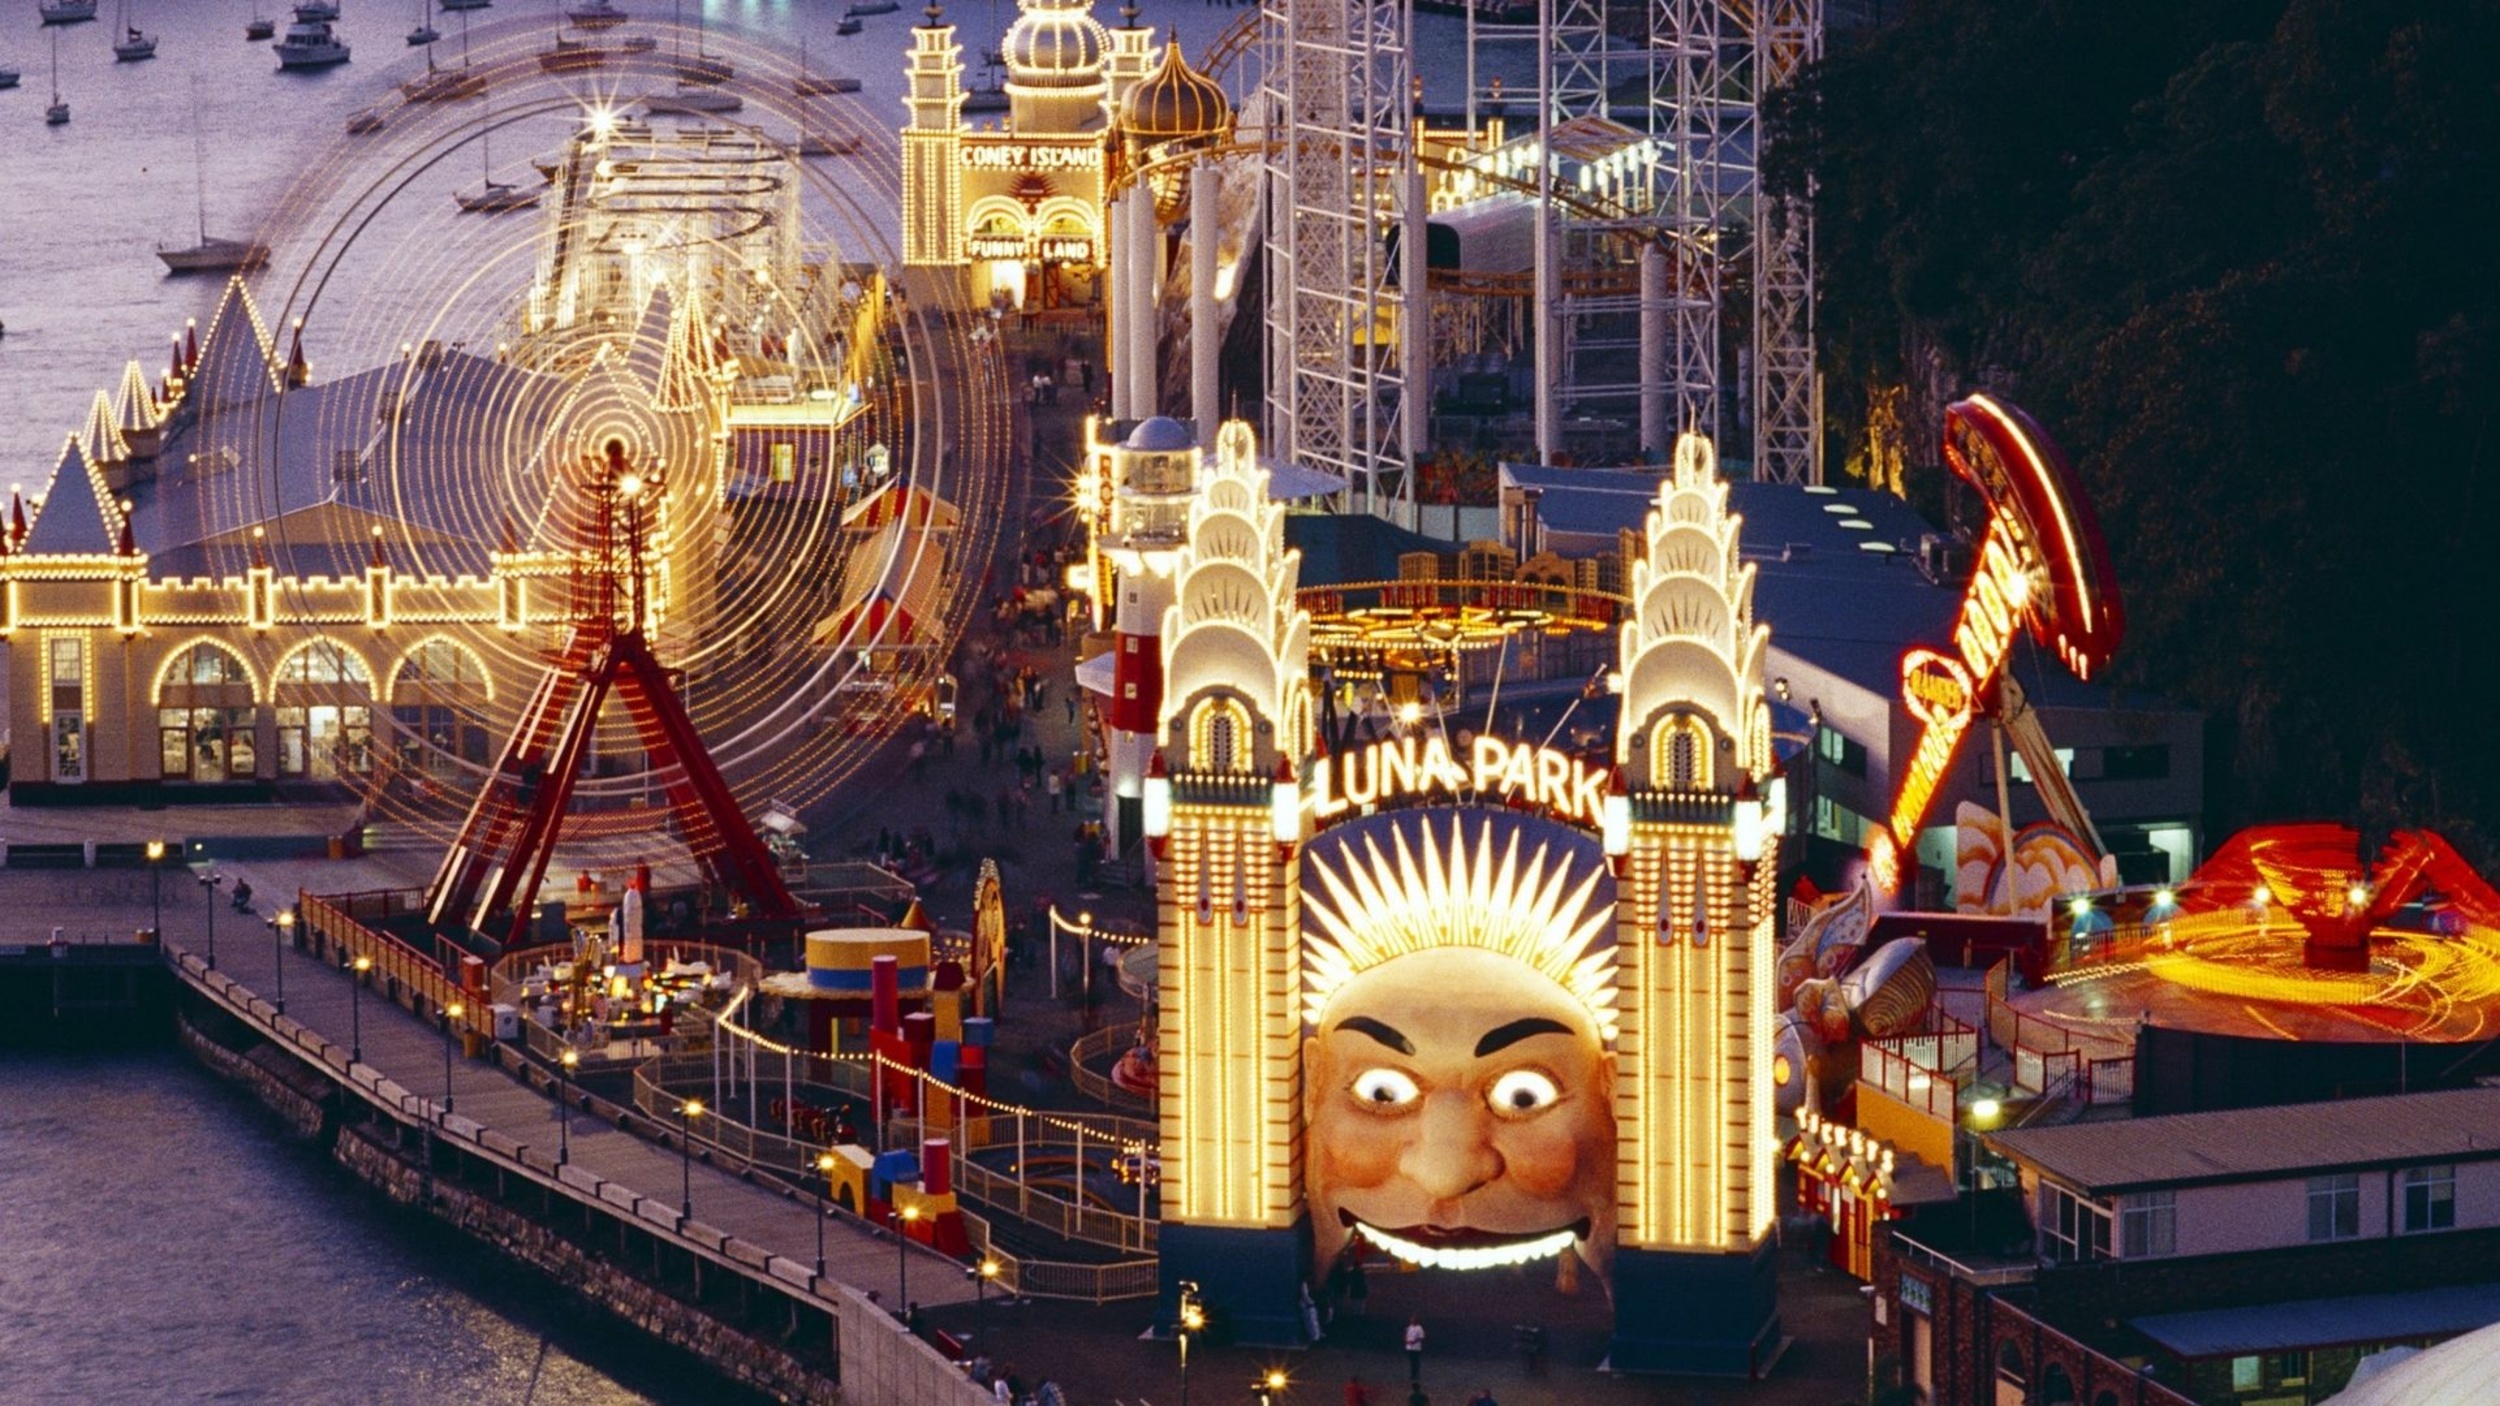 <p>Those with kids may want to take a ferry to Luna Park. This carnival of attractions, including theme park rides and Ferris wheels, is a fun way to spend an evening with the family. </p><p><a href='https://www.msn.com/en-us/community/channel/vid-cj9pqbr0vn9in2b6ddcd8sfgpfq6x6utp44fssrv6mc2gtybw0us'>Follow us on MSN to see more of our exclusive lifestyle content.</a></p>